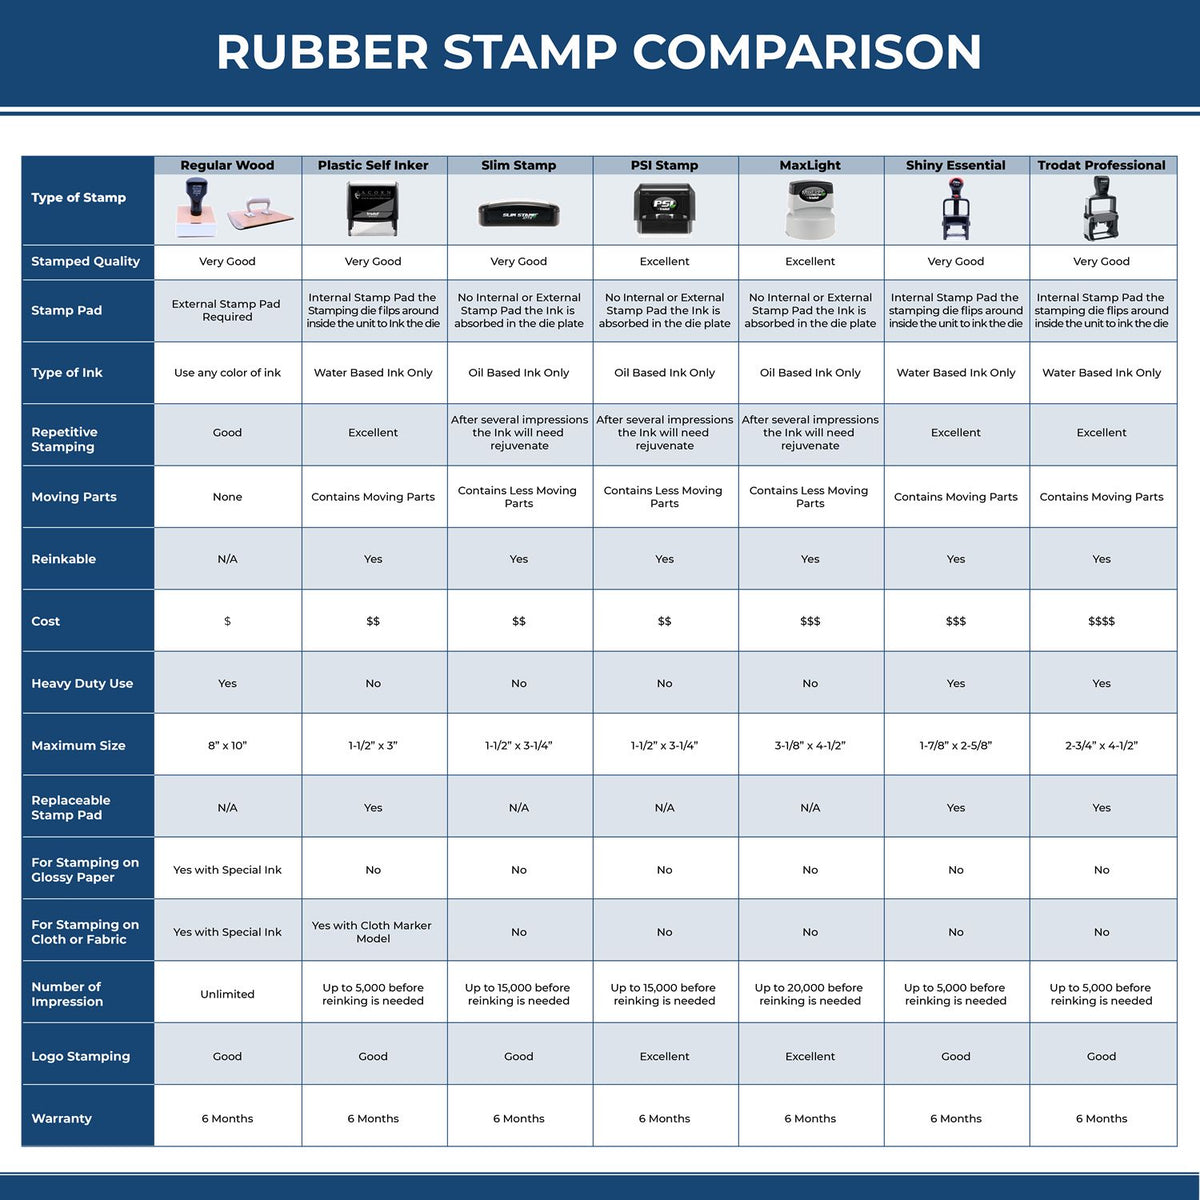 A comparison chart for the different types of mount models available for the Premium MaxLight Pre-Inked Nevada Engineering Stamp.